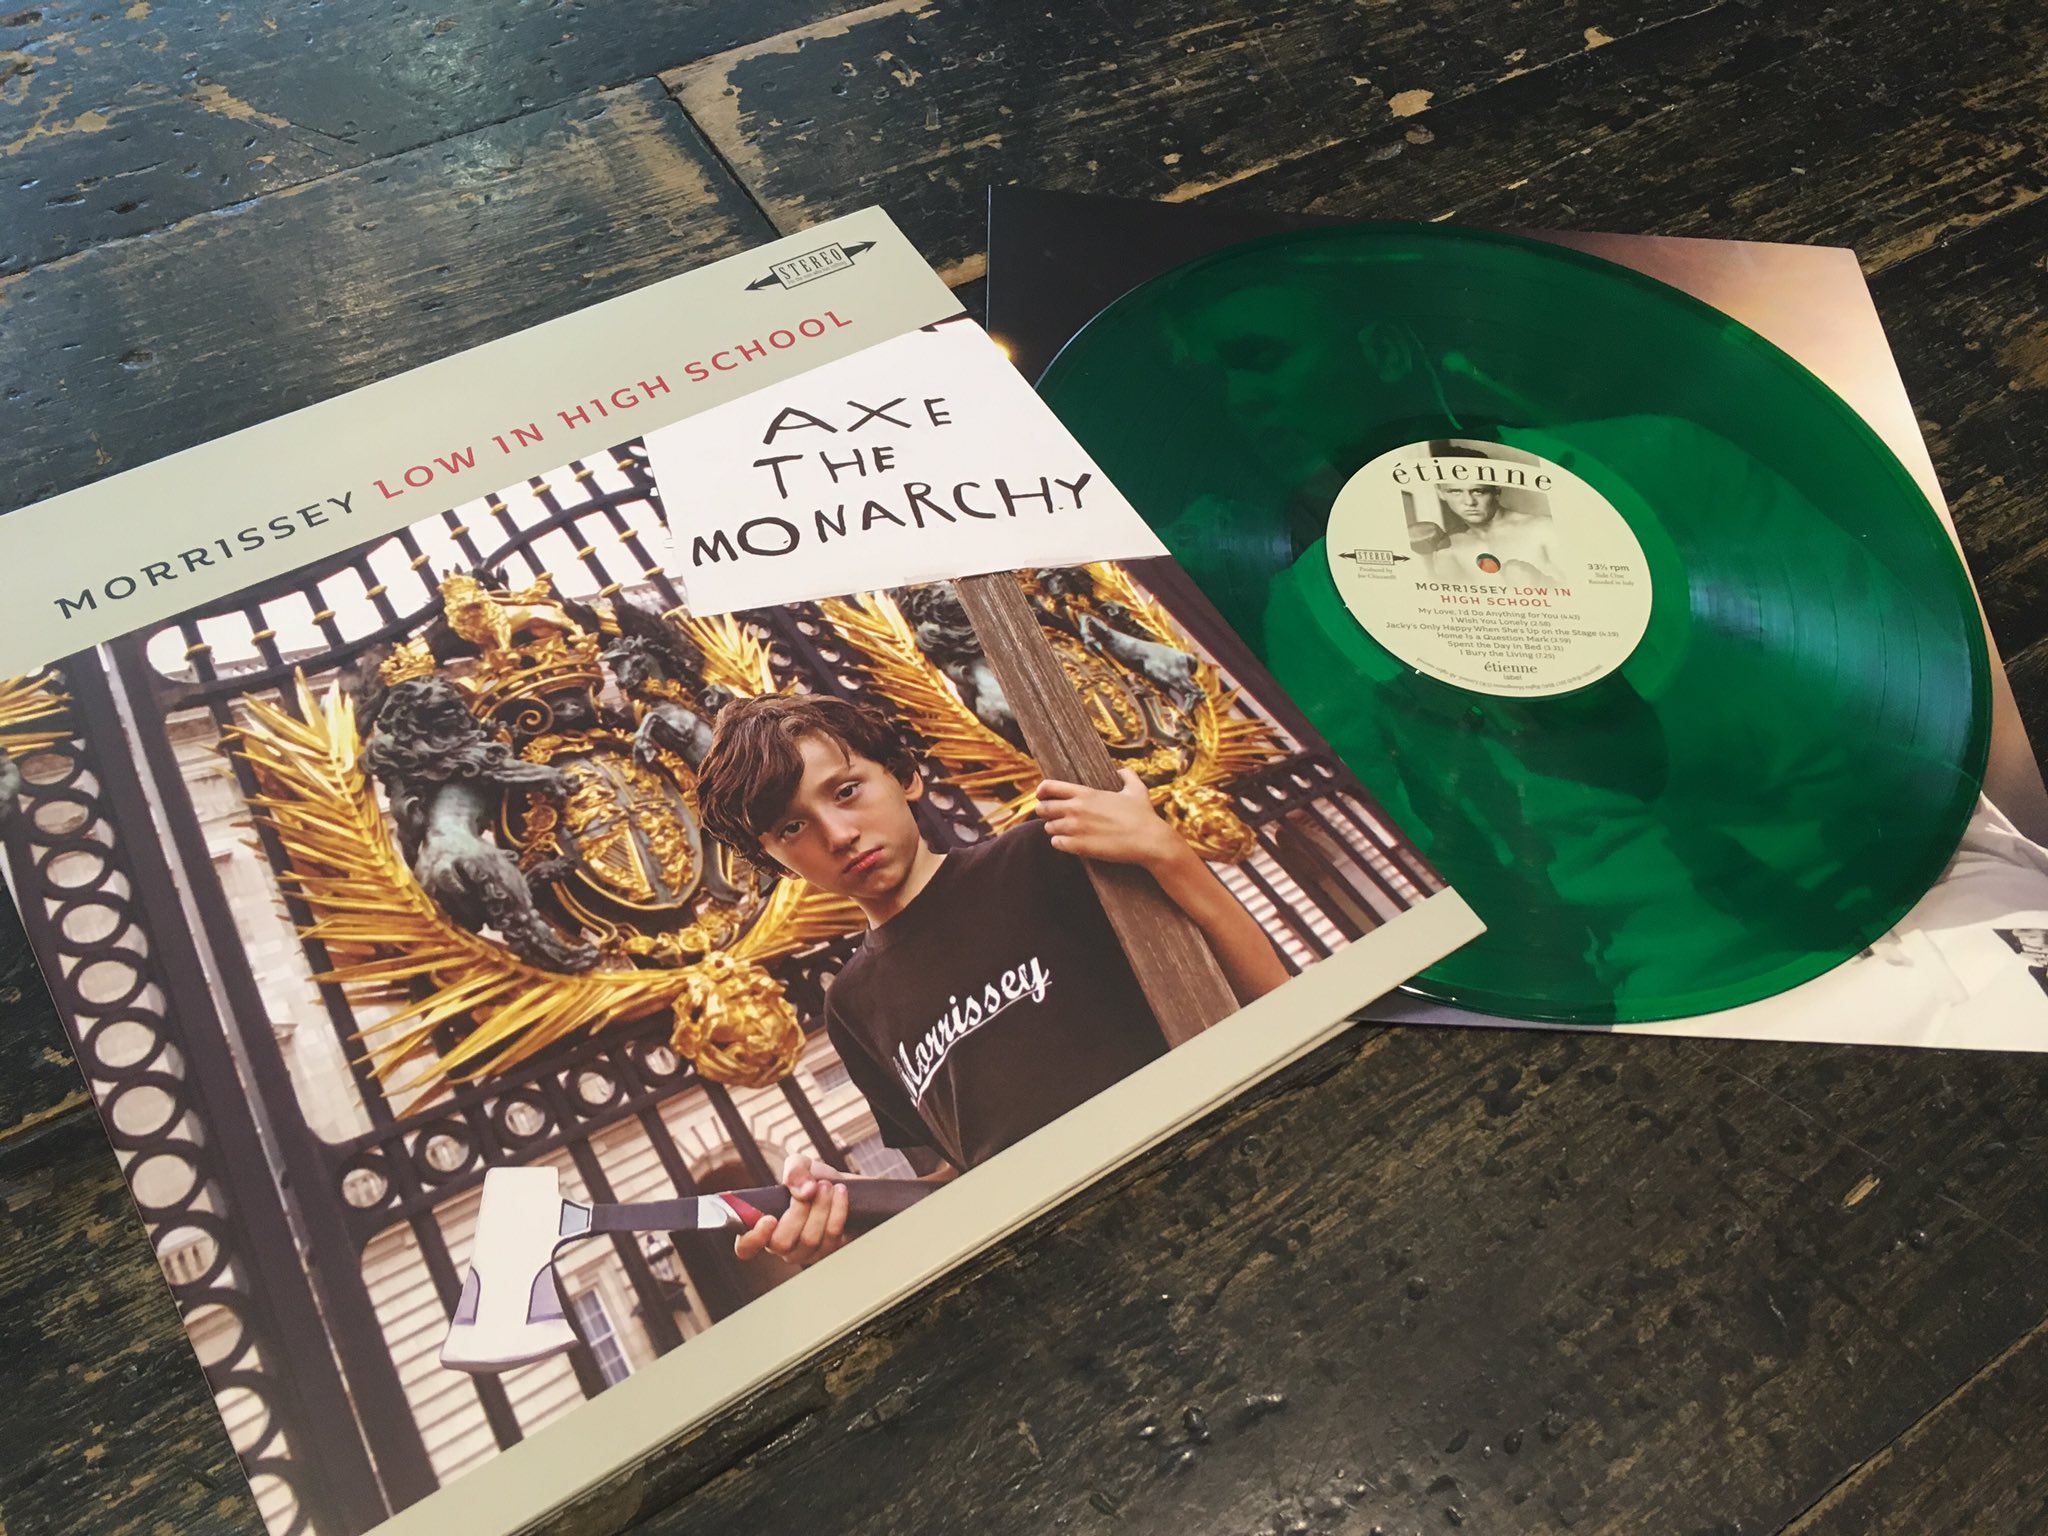 Rise Music - Bristol on Twitter: "Out today - the new Morrissey record 'Low In High School' - ltd green vinyl with download available in store now https://t.co/GepS2j9cKE" /